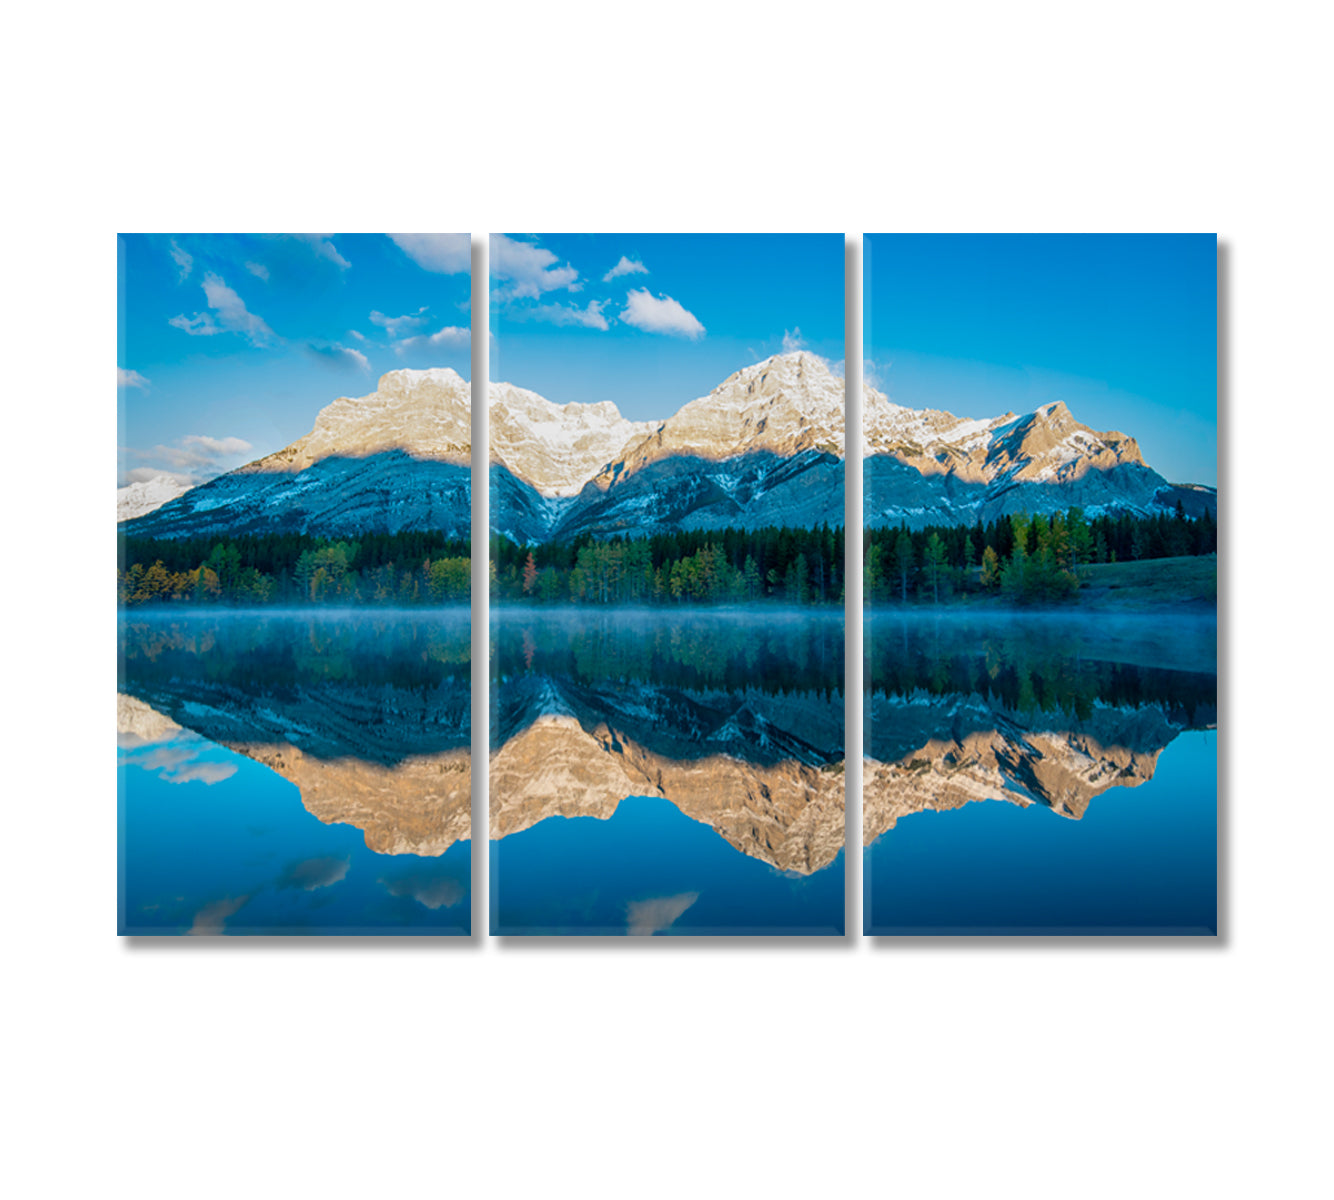 Wedge Pond with Mountain Reflection Alberta Canvas Print-Canvas Print-CetArt-3 Panels-36x24 inches-CetArt